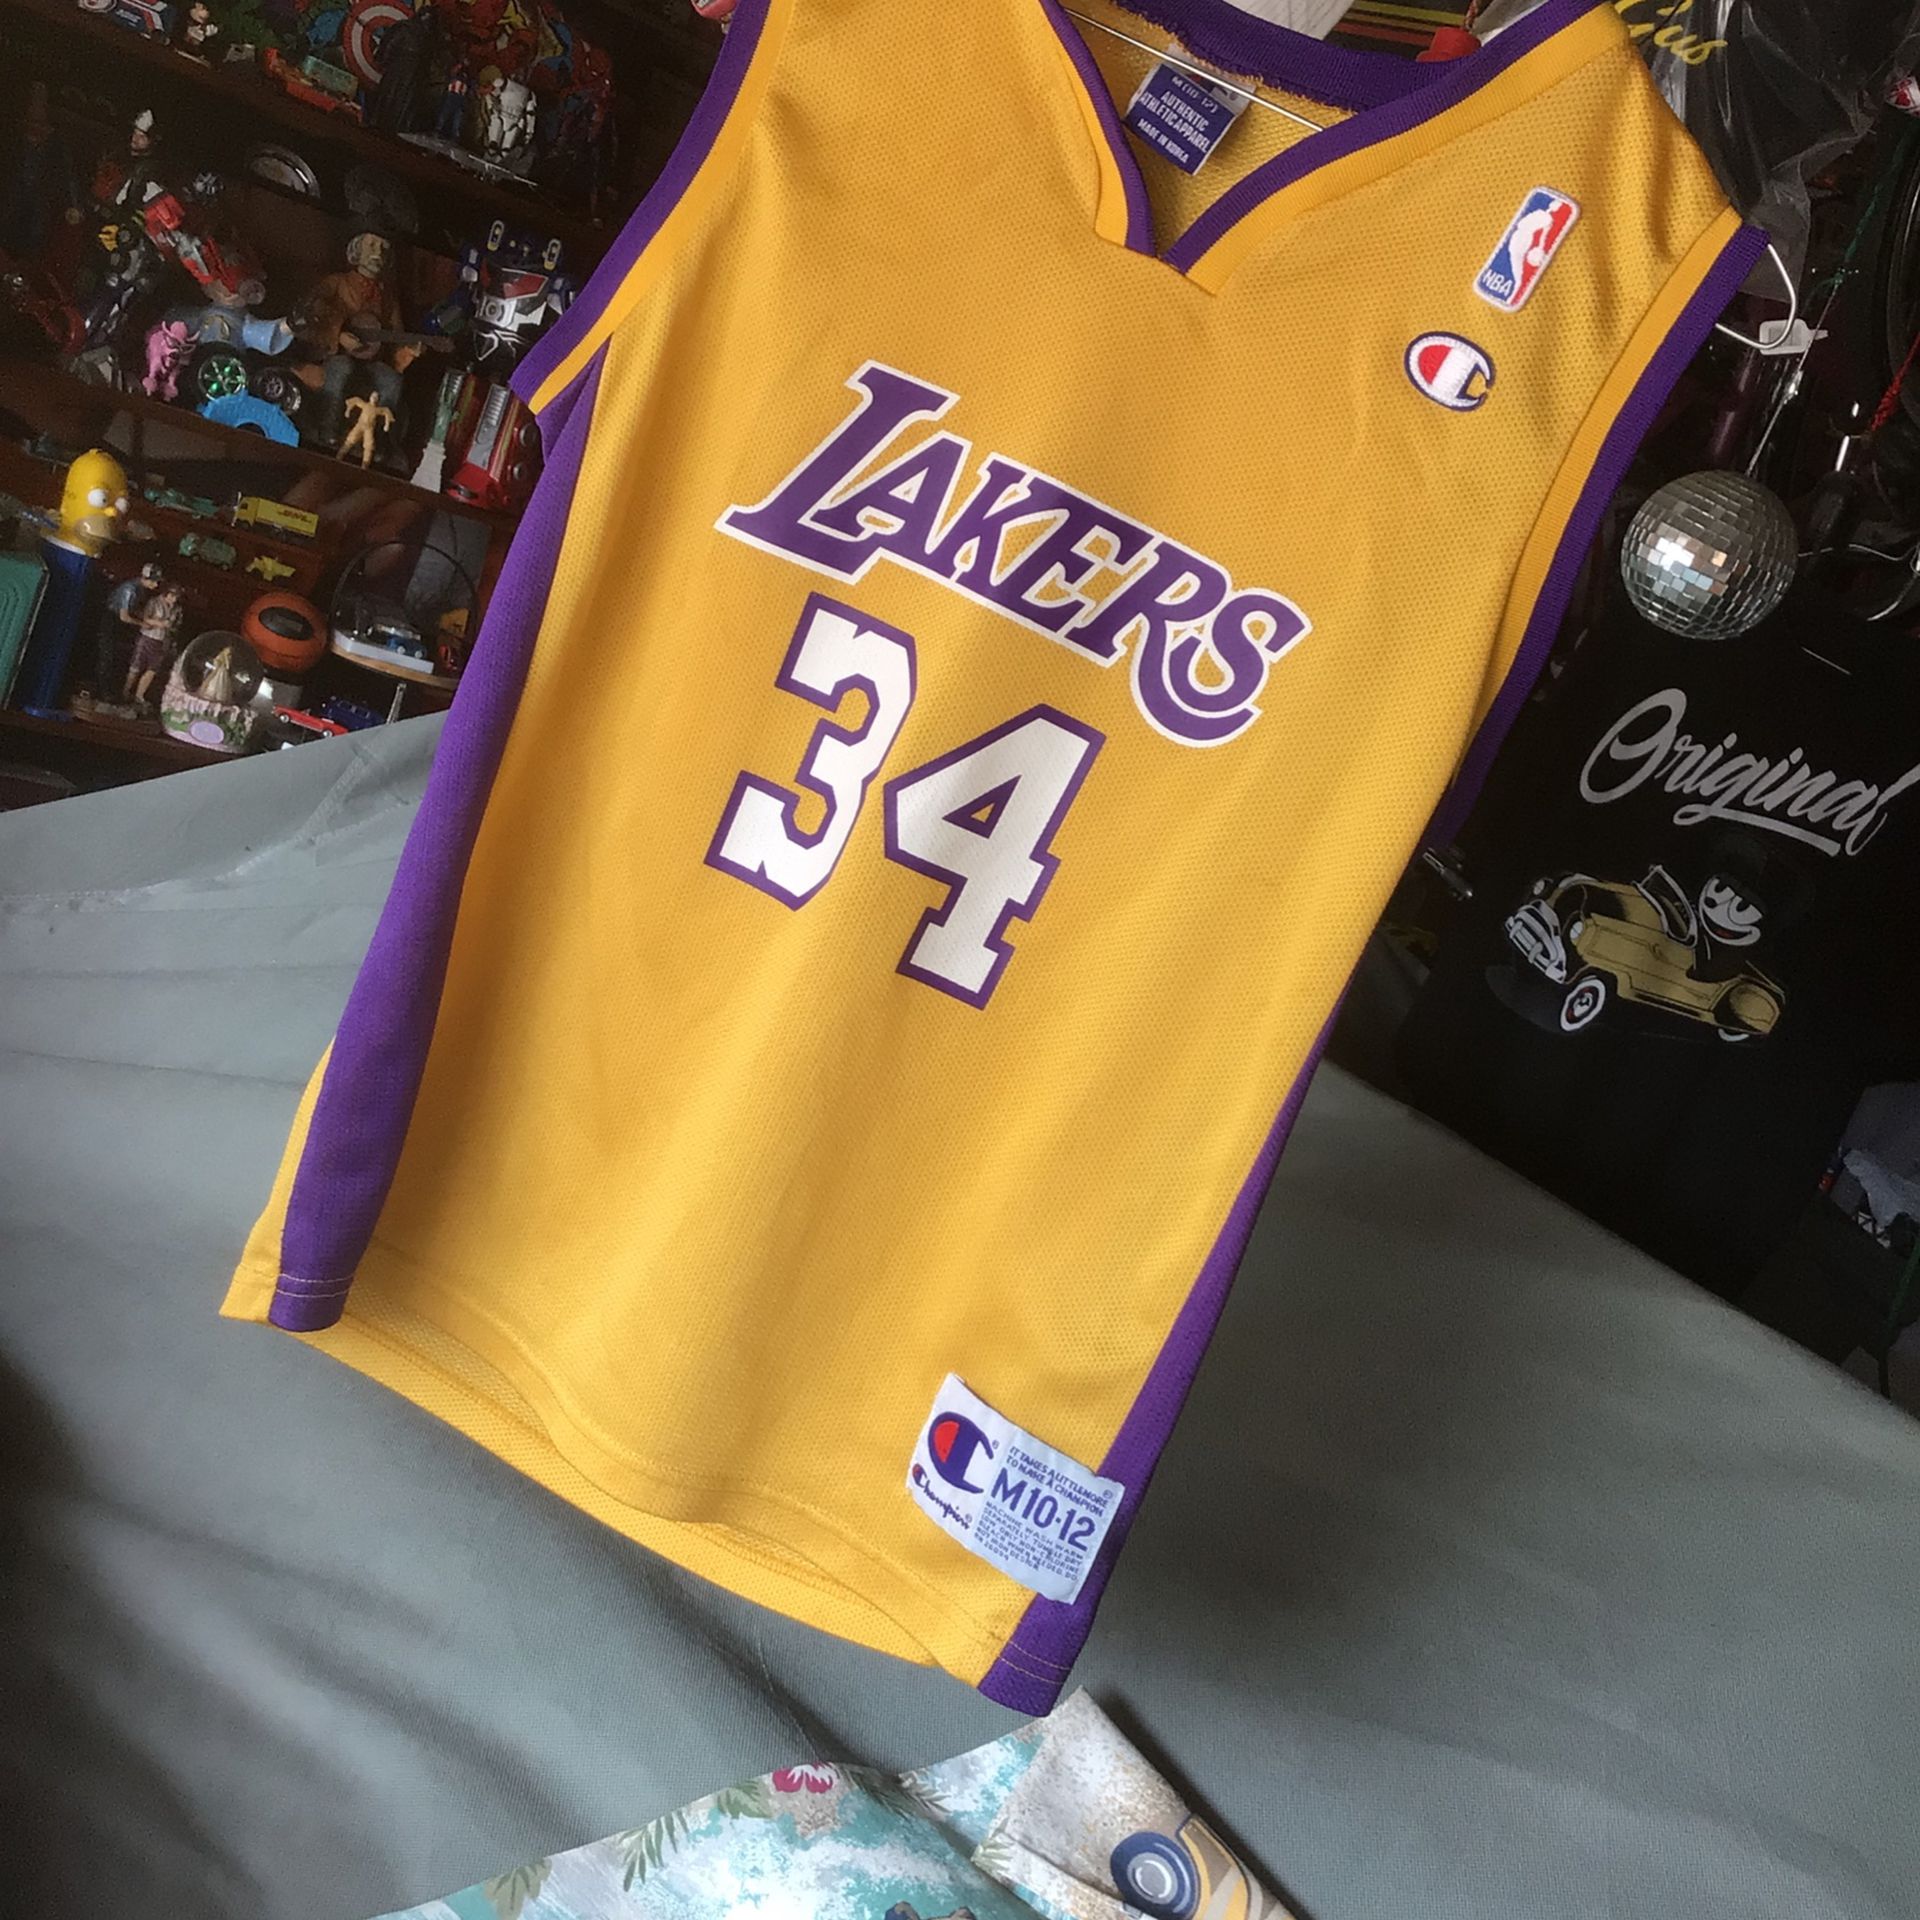 lakers number 10 jersey